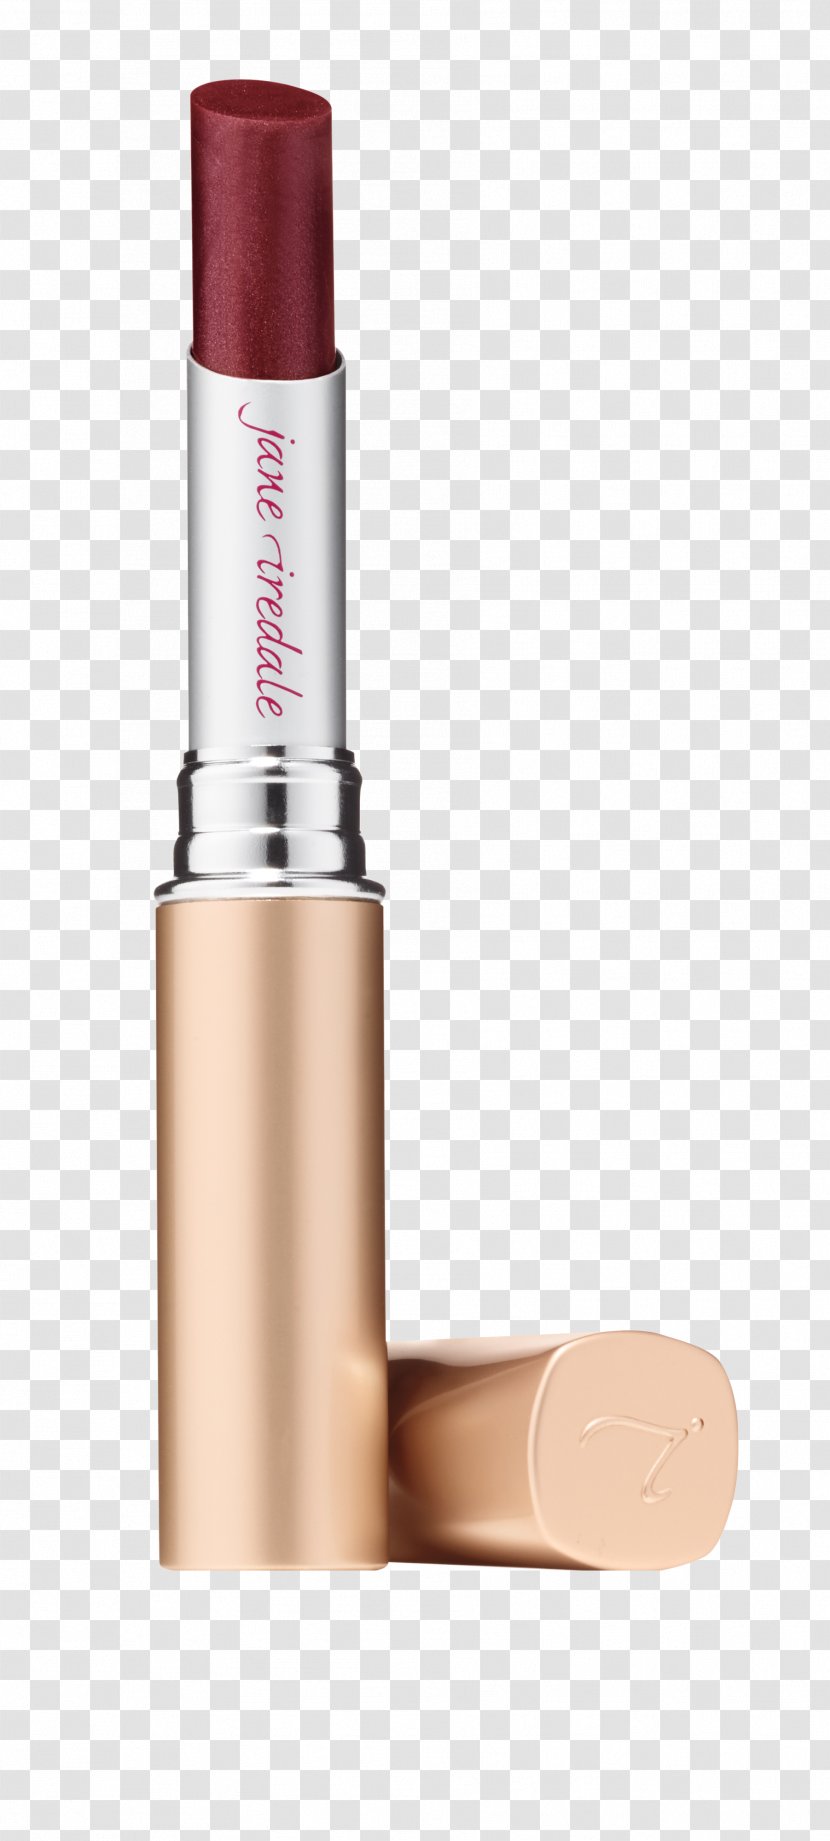 Jane Iredale PureMoist Lipstick Cosmetics Lip Gloss Liner - Just Kissed And Cheek Stain - Natural Transparent PNG